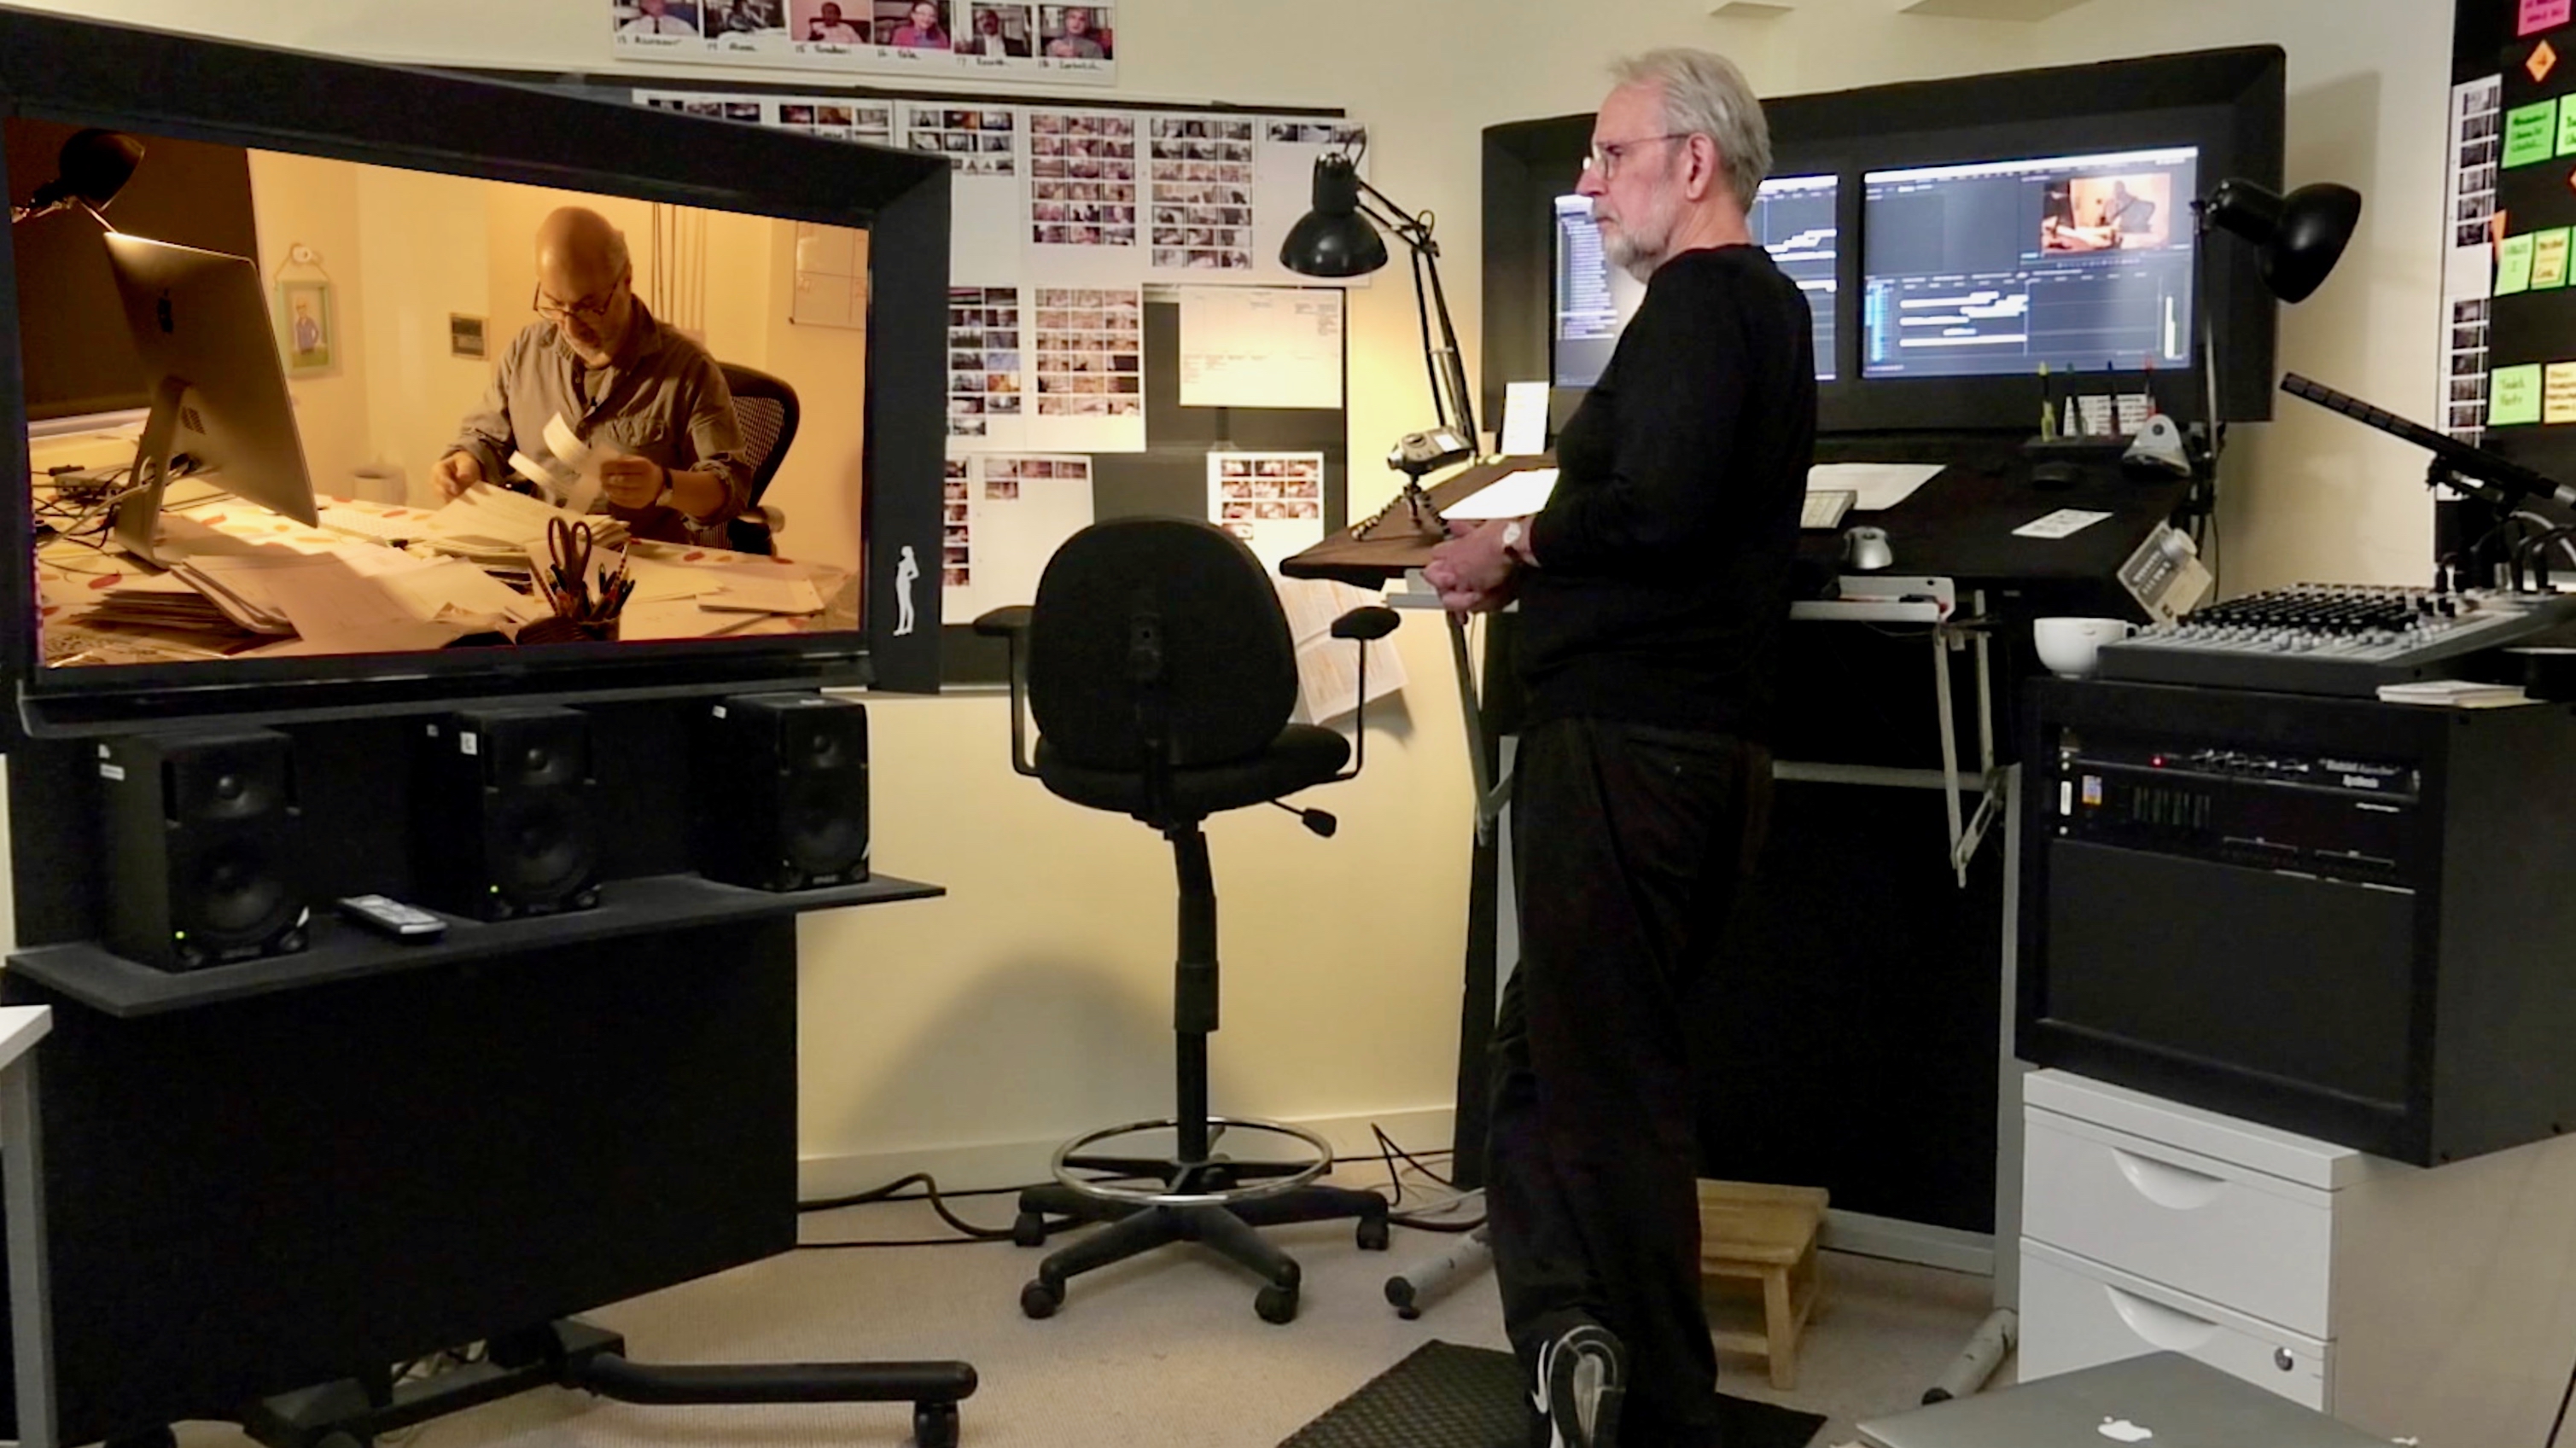 Walter Murch stands at his editing table, watching a scene from his latest documentary, Coup 53.